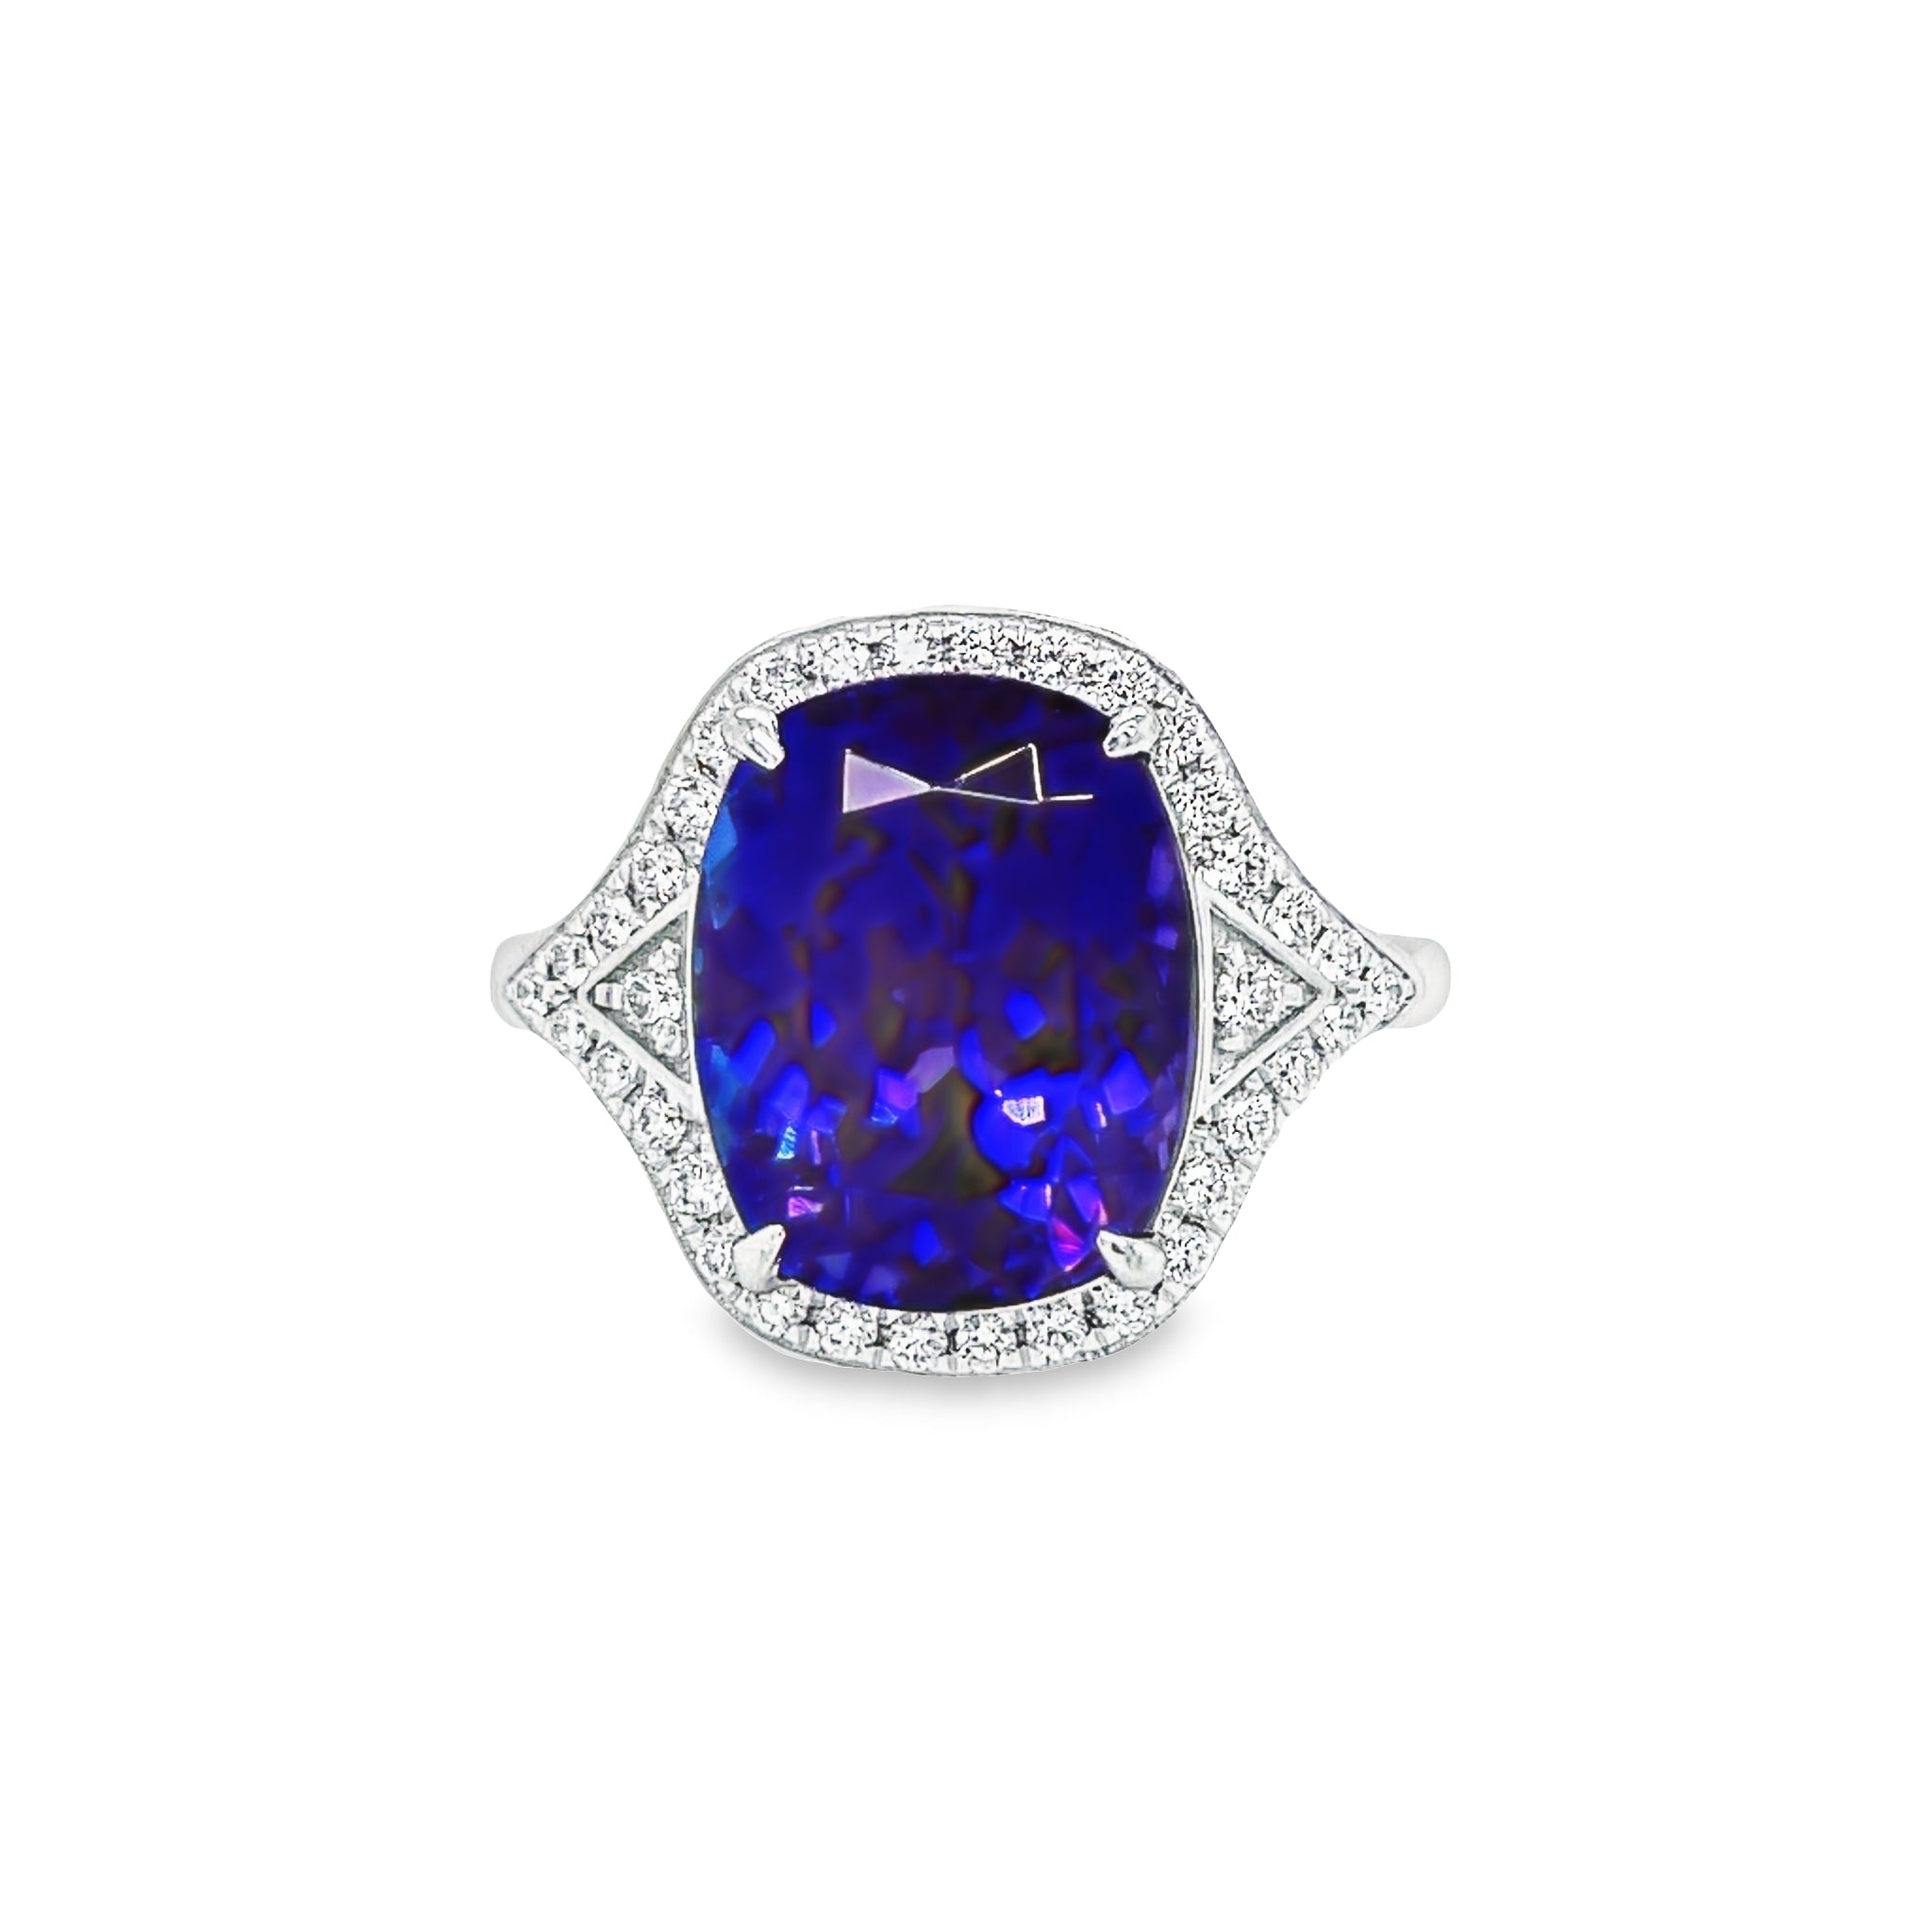 This exquisite modified radiant cut Tanzanite 6.75 cts & Diamond Cocktail Ring is a stunning statement piece. Its captivating Tanzanite center stone is accented by a halo of glittering round diamonds. Set in luxurious platinum, this piece radiates elegance and sophistication.